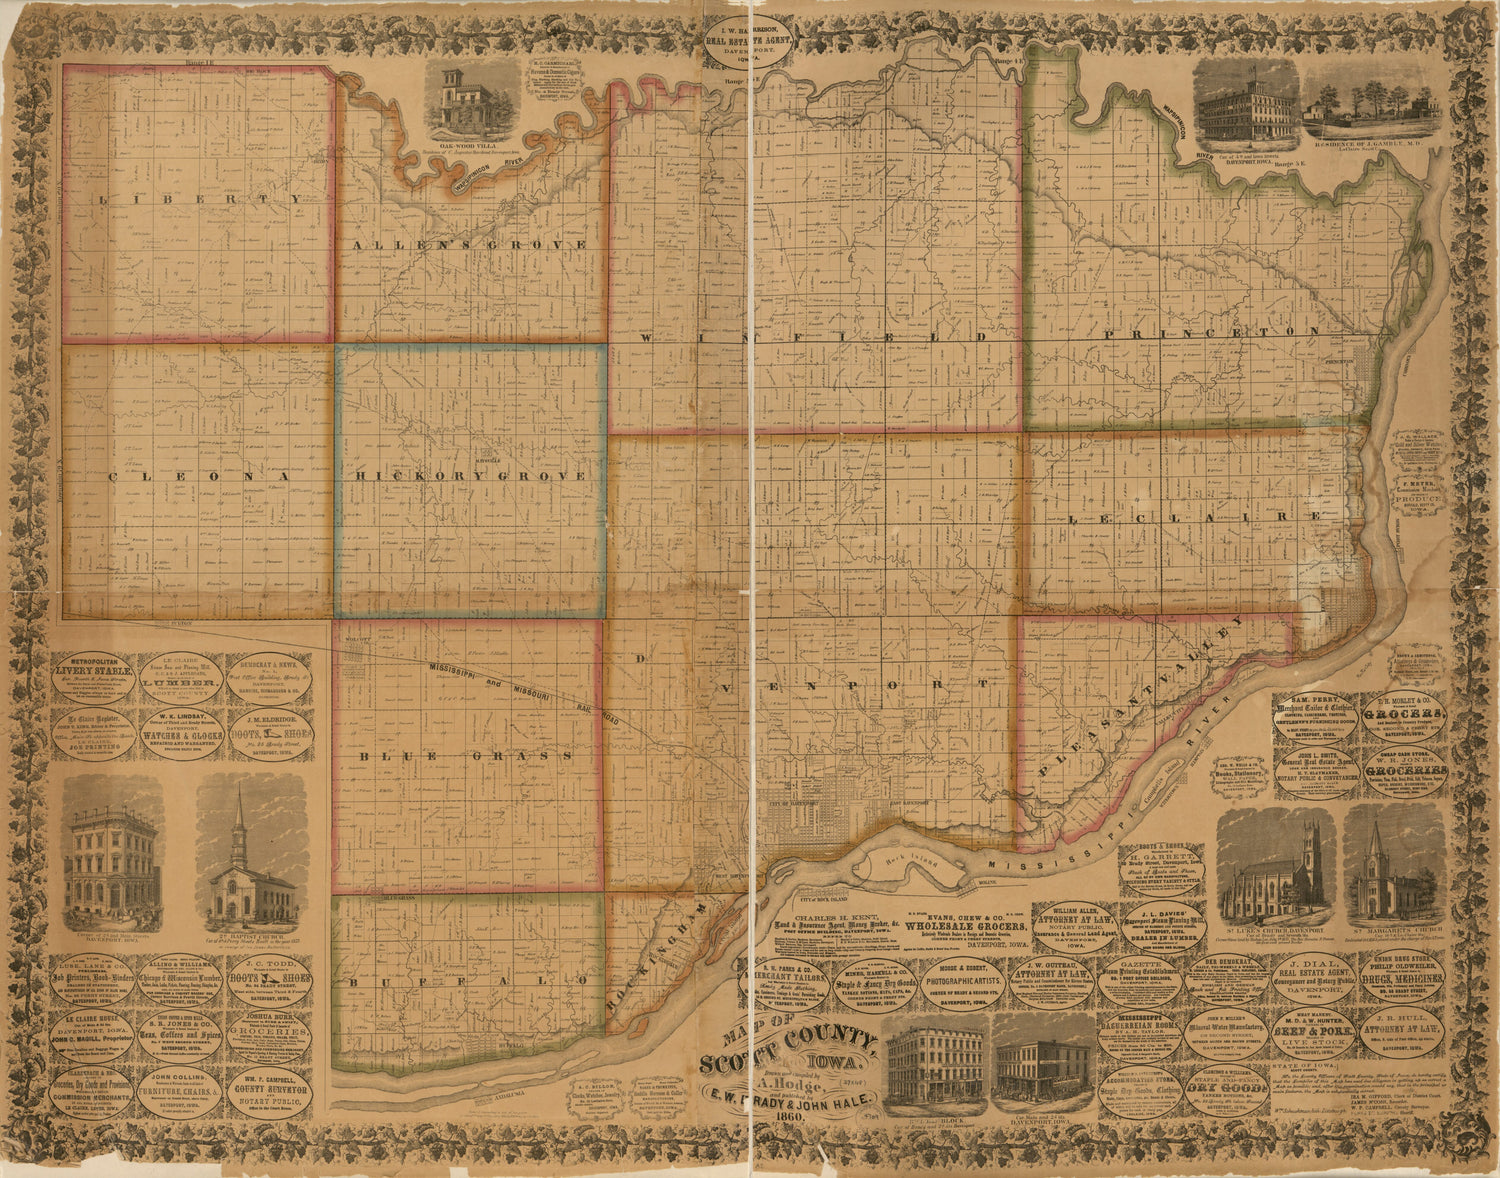 This old map of Map of Scott County, Iowa from 1860 was created by A. Hodge in 1860